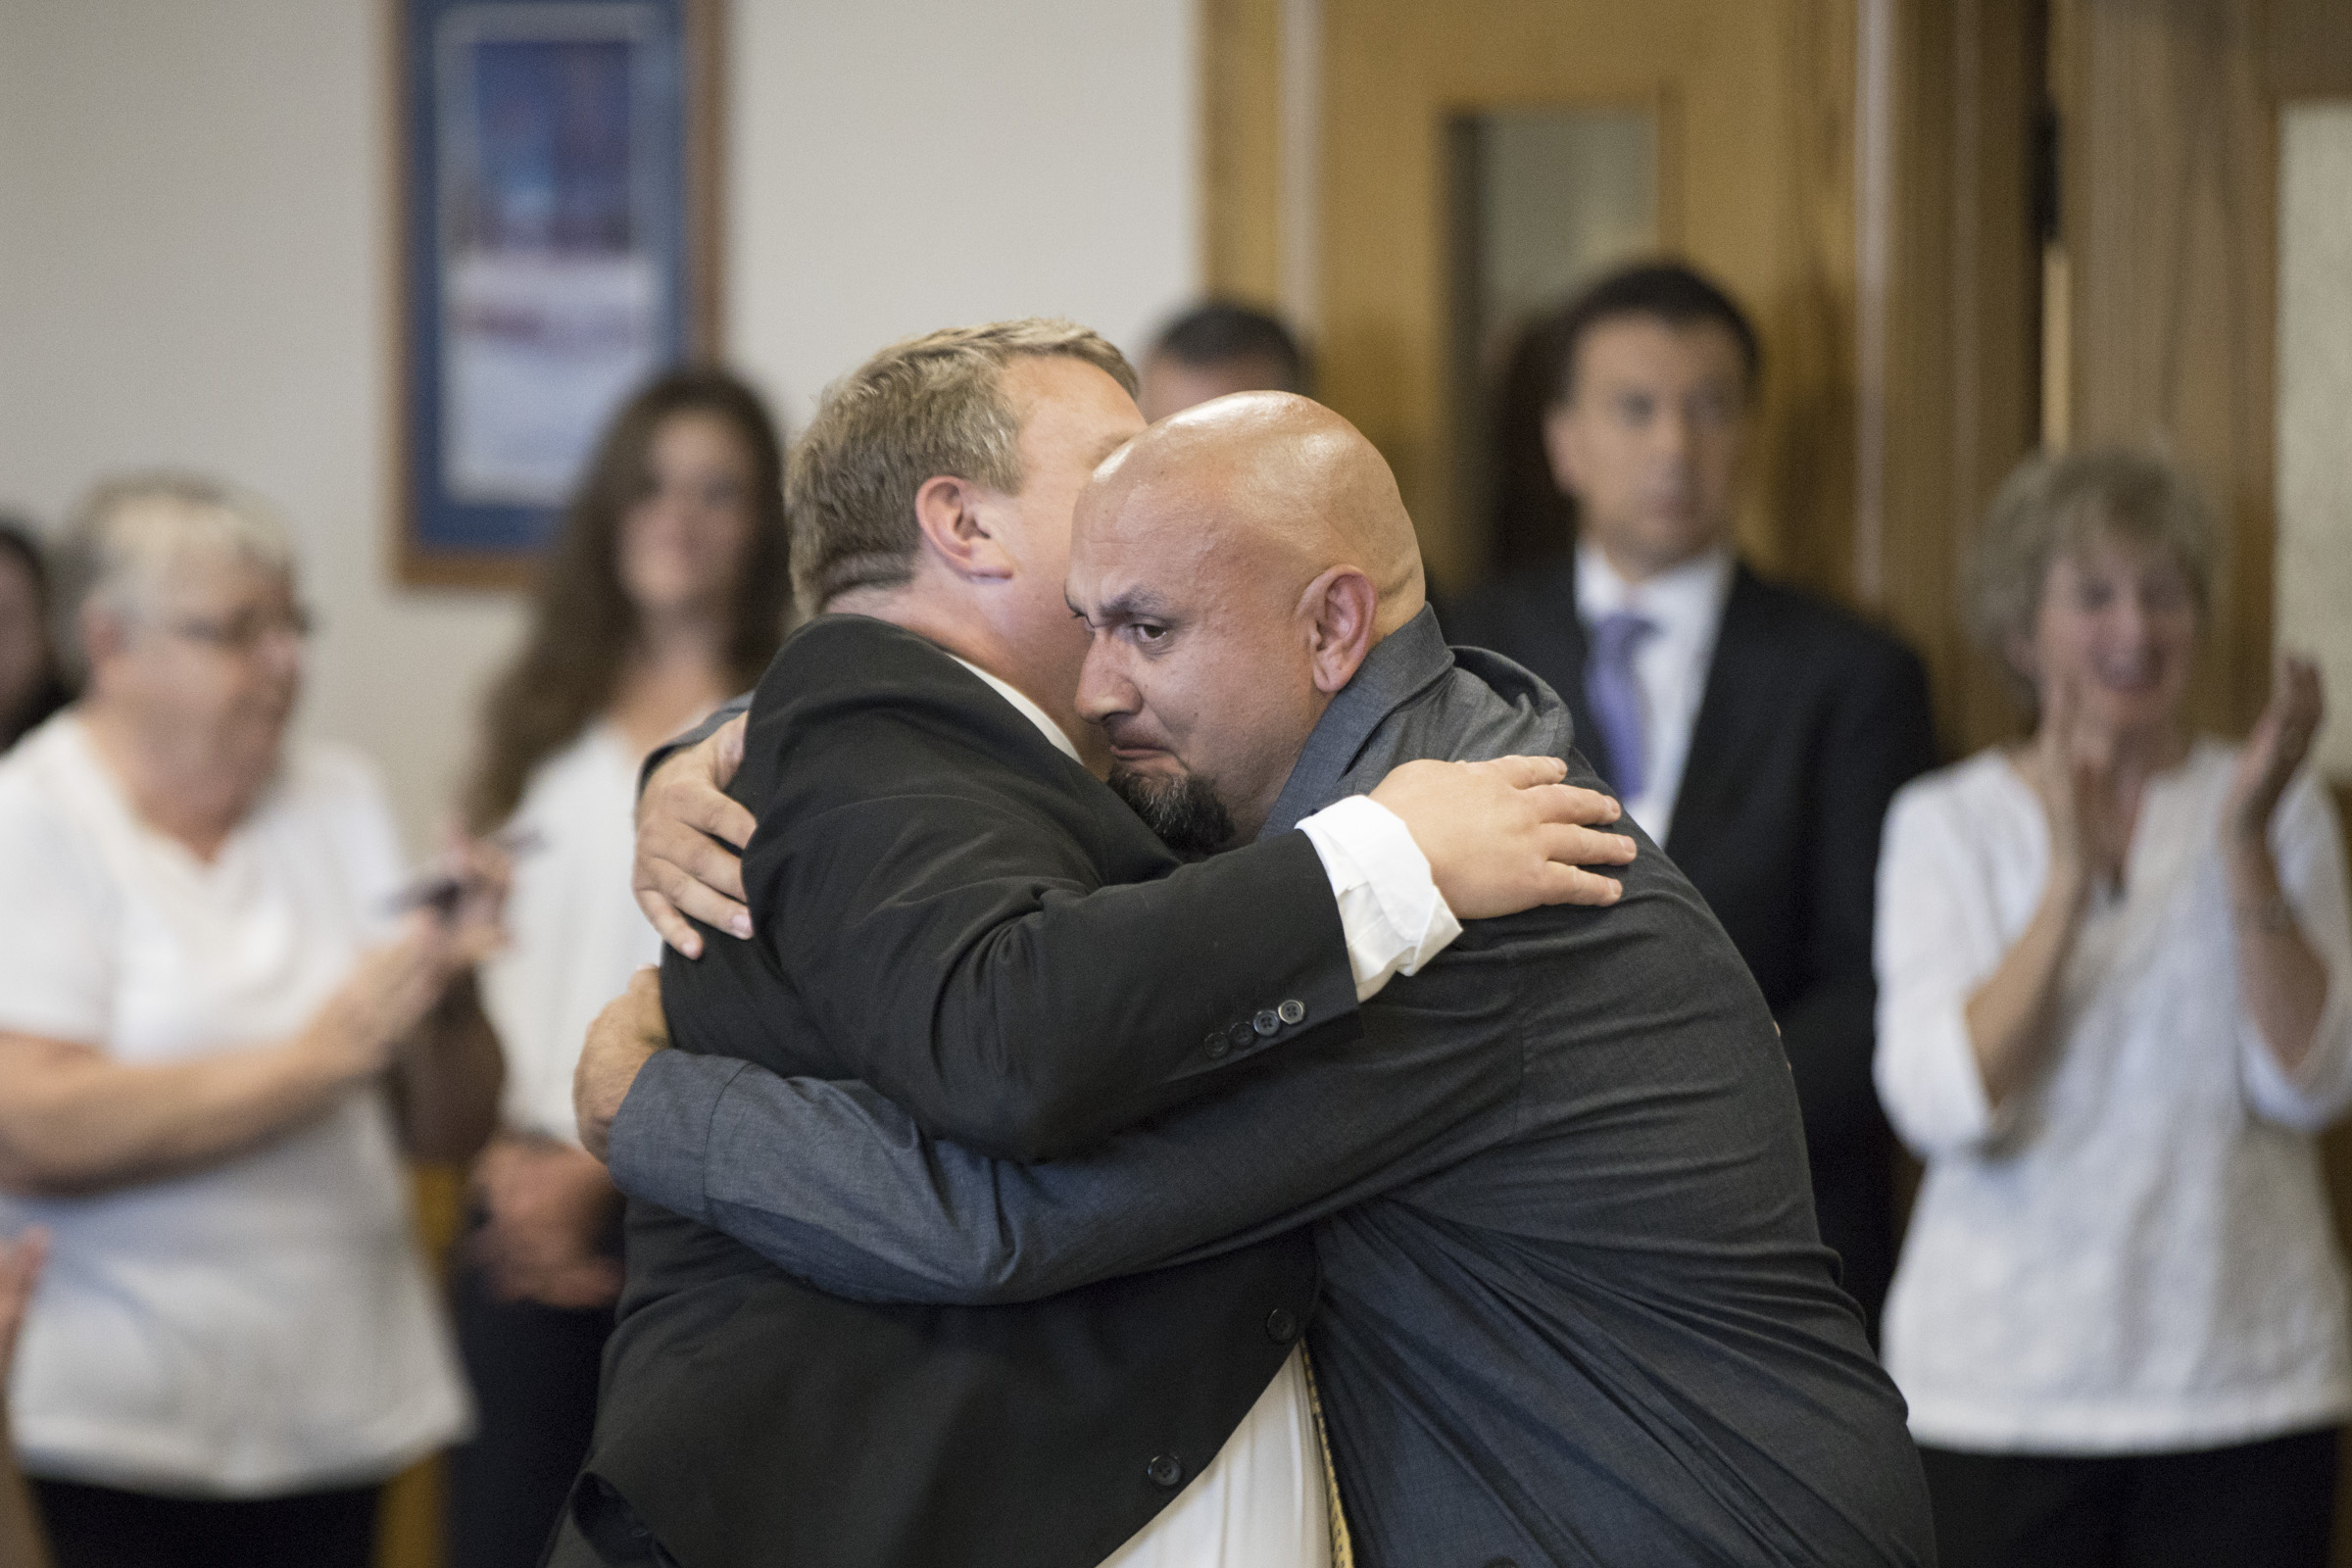 Christopher Tapp hugging his lawyer John K. Thomas  - Post Conviction Relief Proceedings on Wednesday, July 17, 2019 in Idaho Falls, Idaho. (Image: Otto Kitsinger/AP Images for The Innocence Project)